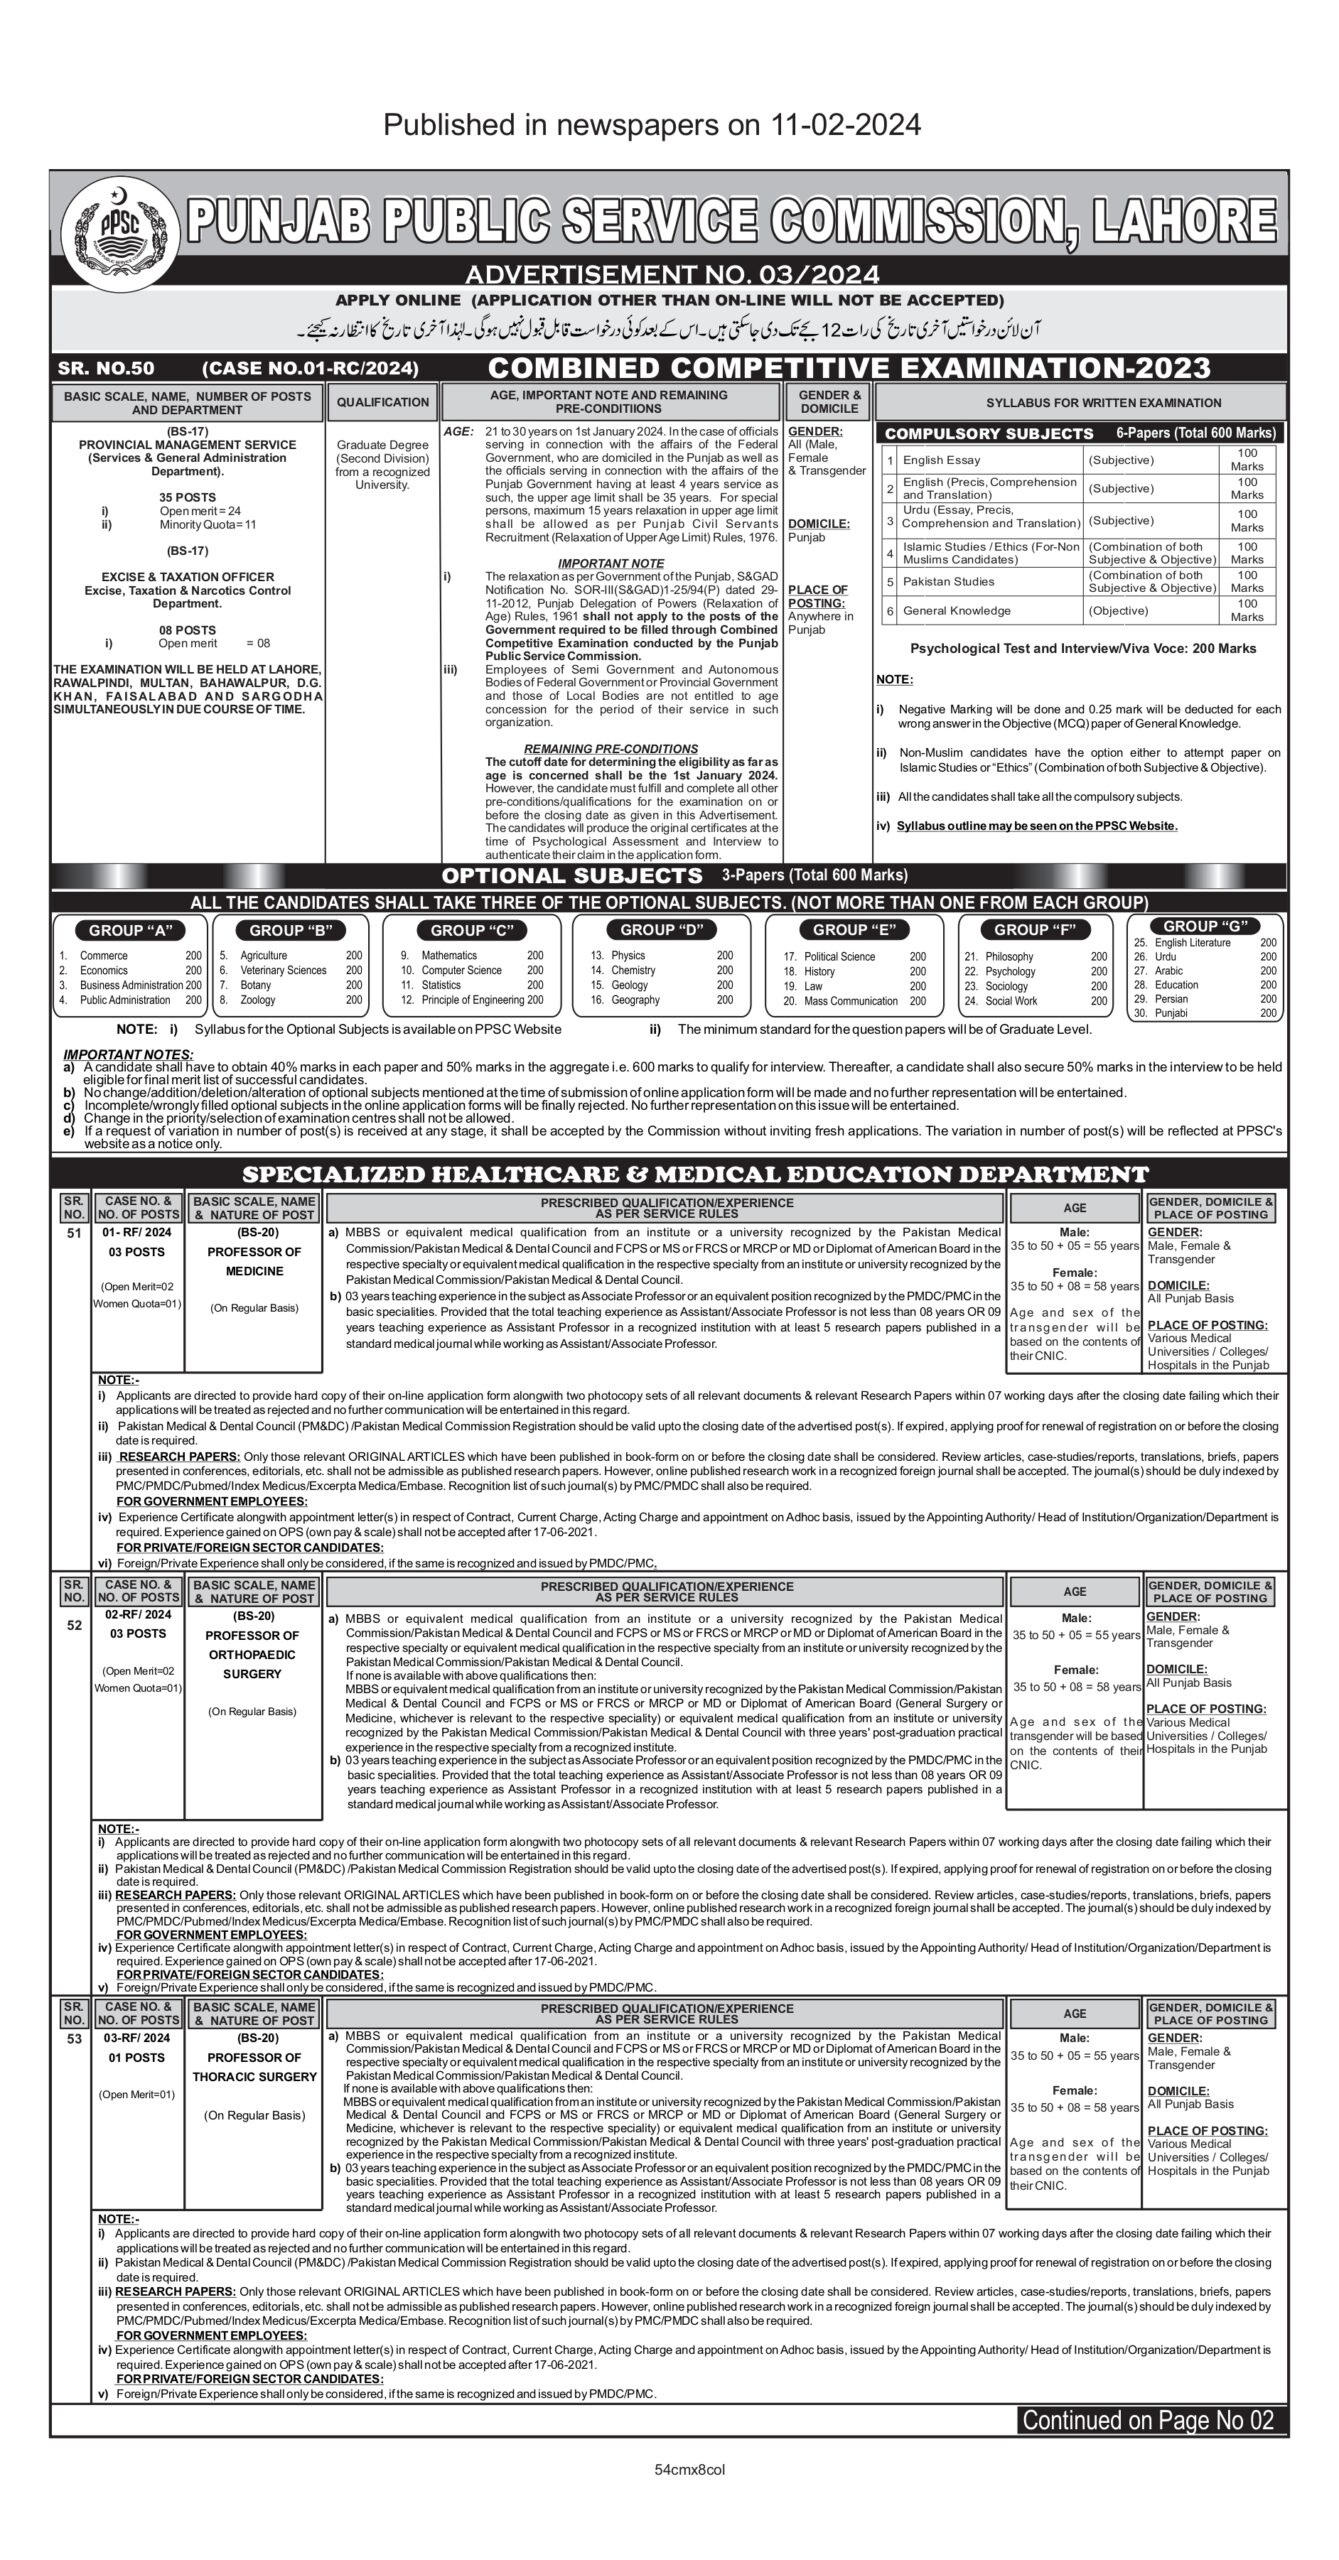 PPSC Provincial Management Service PMS Jobs - Combined Competitive Exam 2023